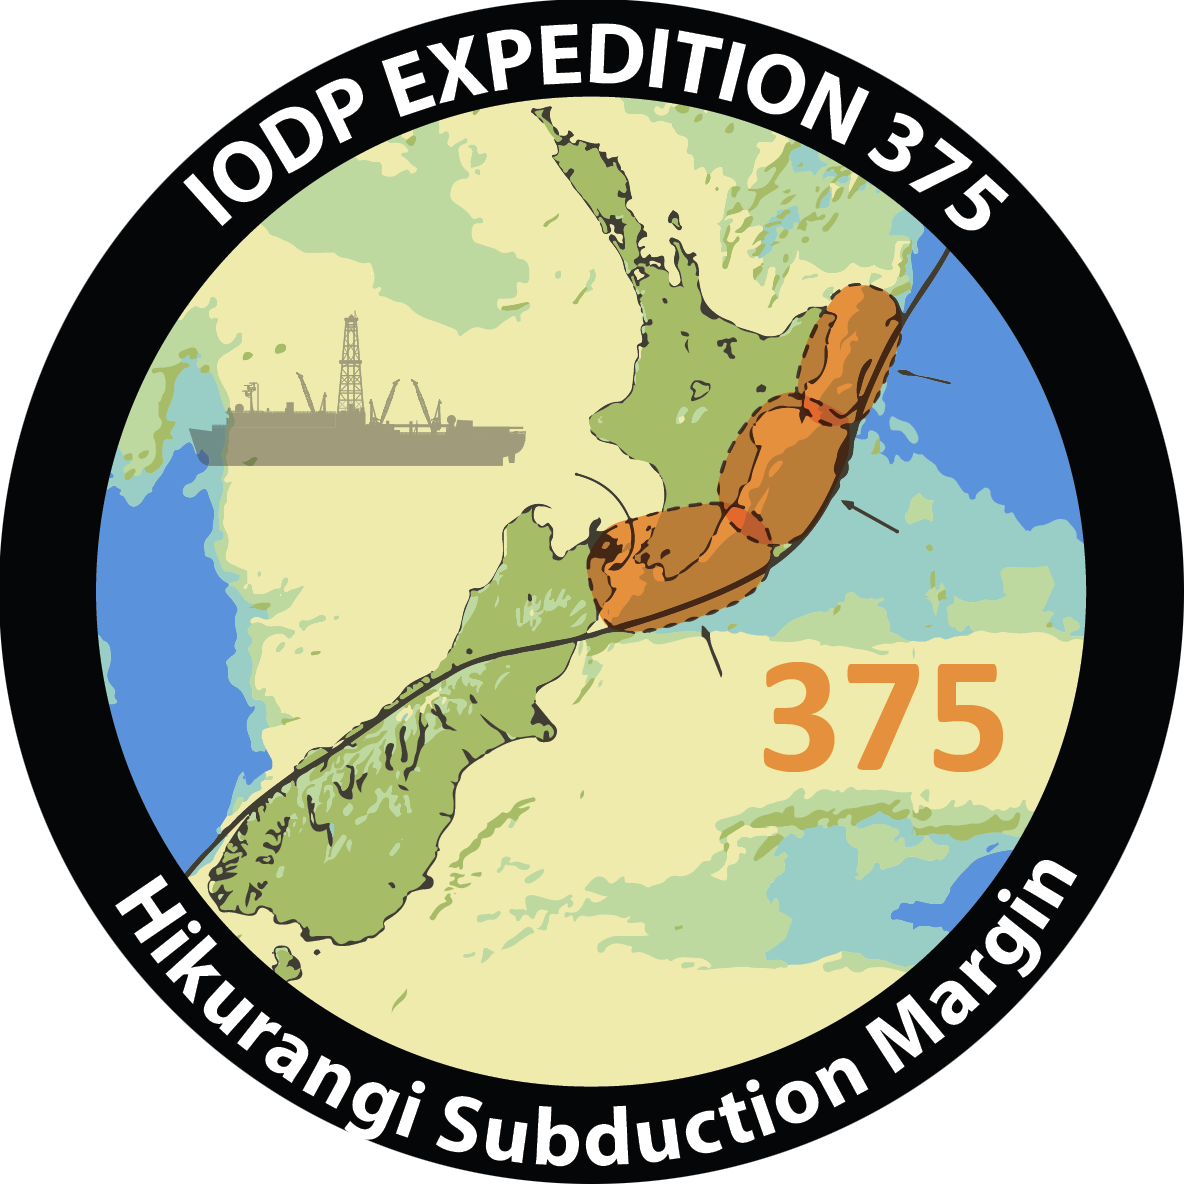 IODP Expedition 375 patch